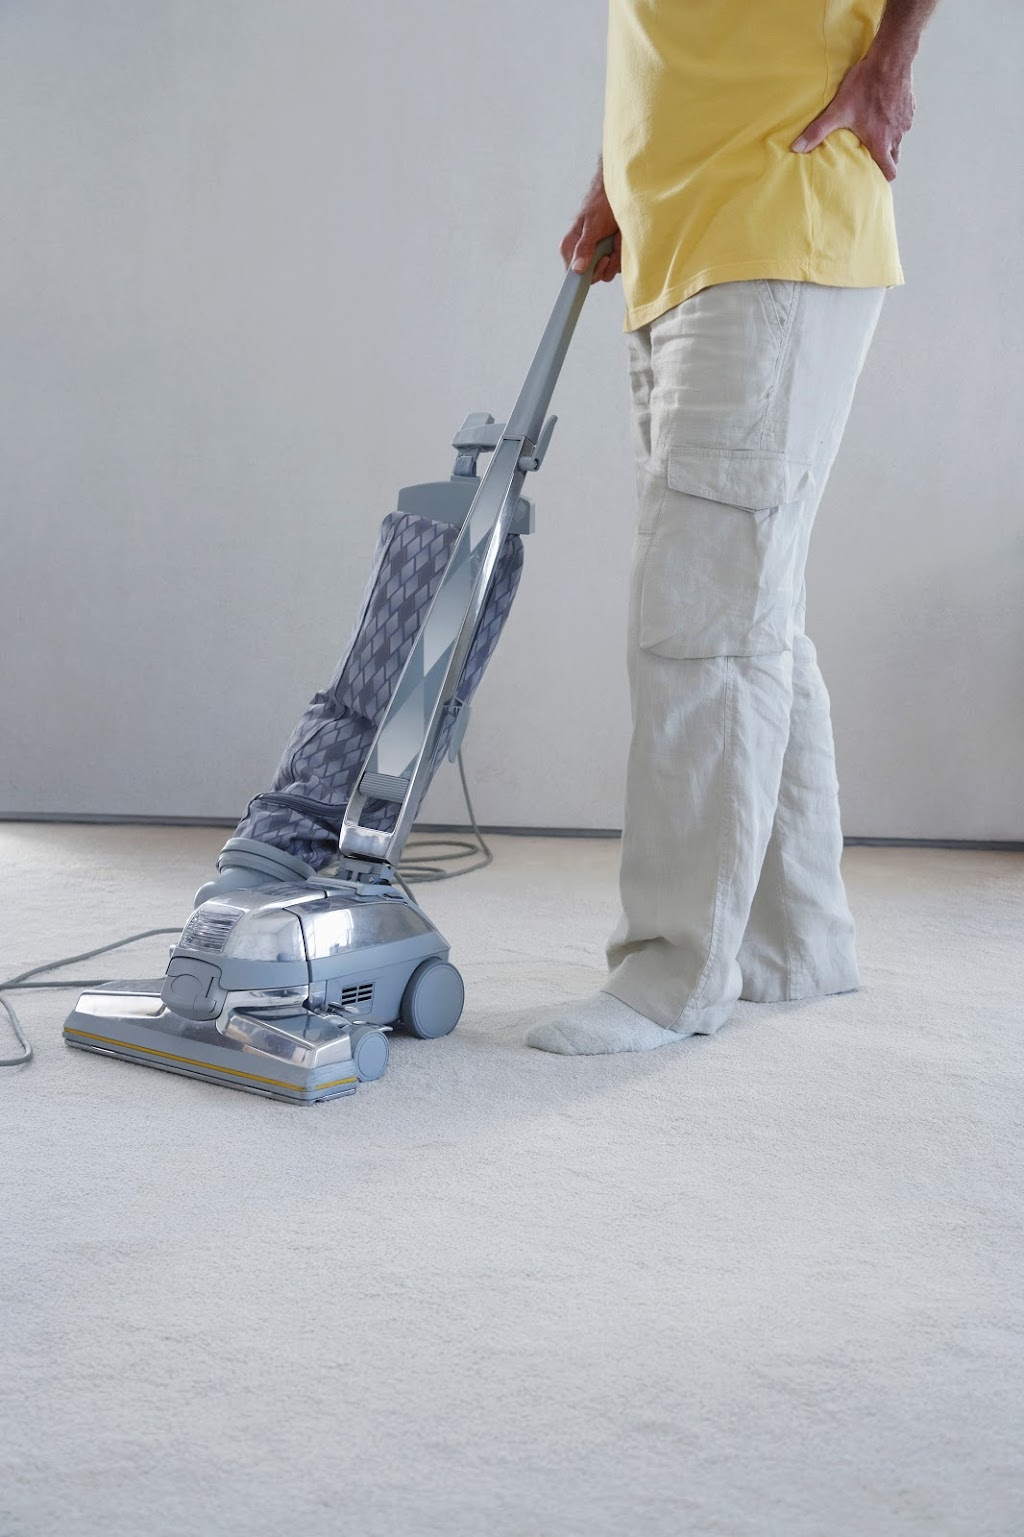 RD Local Carpet Cleaning | Carpet Cleaning Servicing Milperra, Condell Park, East Hills, Georges Hall,, Hammondville, Panania, Pleasure Point, Voyager Point, Milperra NSW 2214, Australia | Phone: (02) 8077 2972